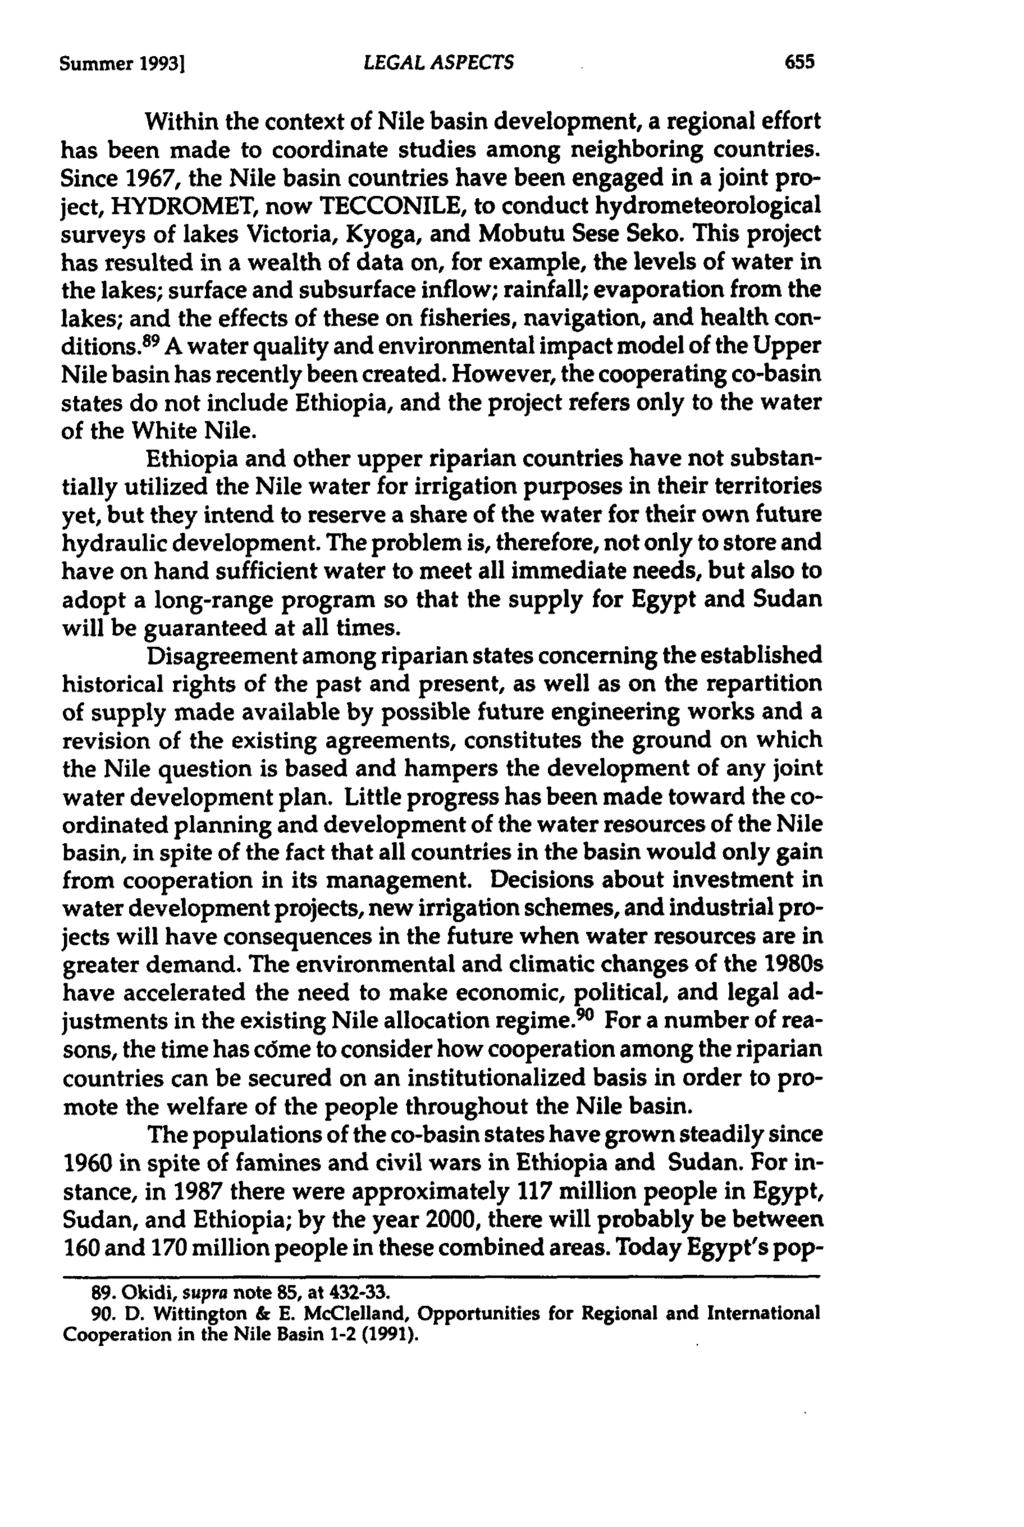 Summer 19931 Within the context of Nile basin development, a regional effort has been made to coordinate studies among neighboring countries.